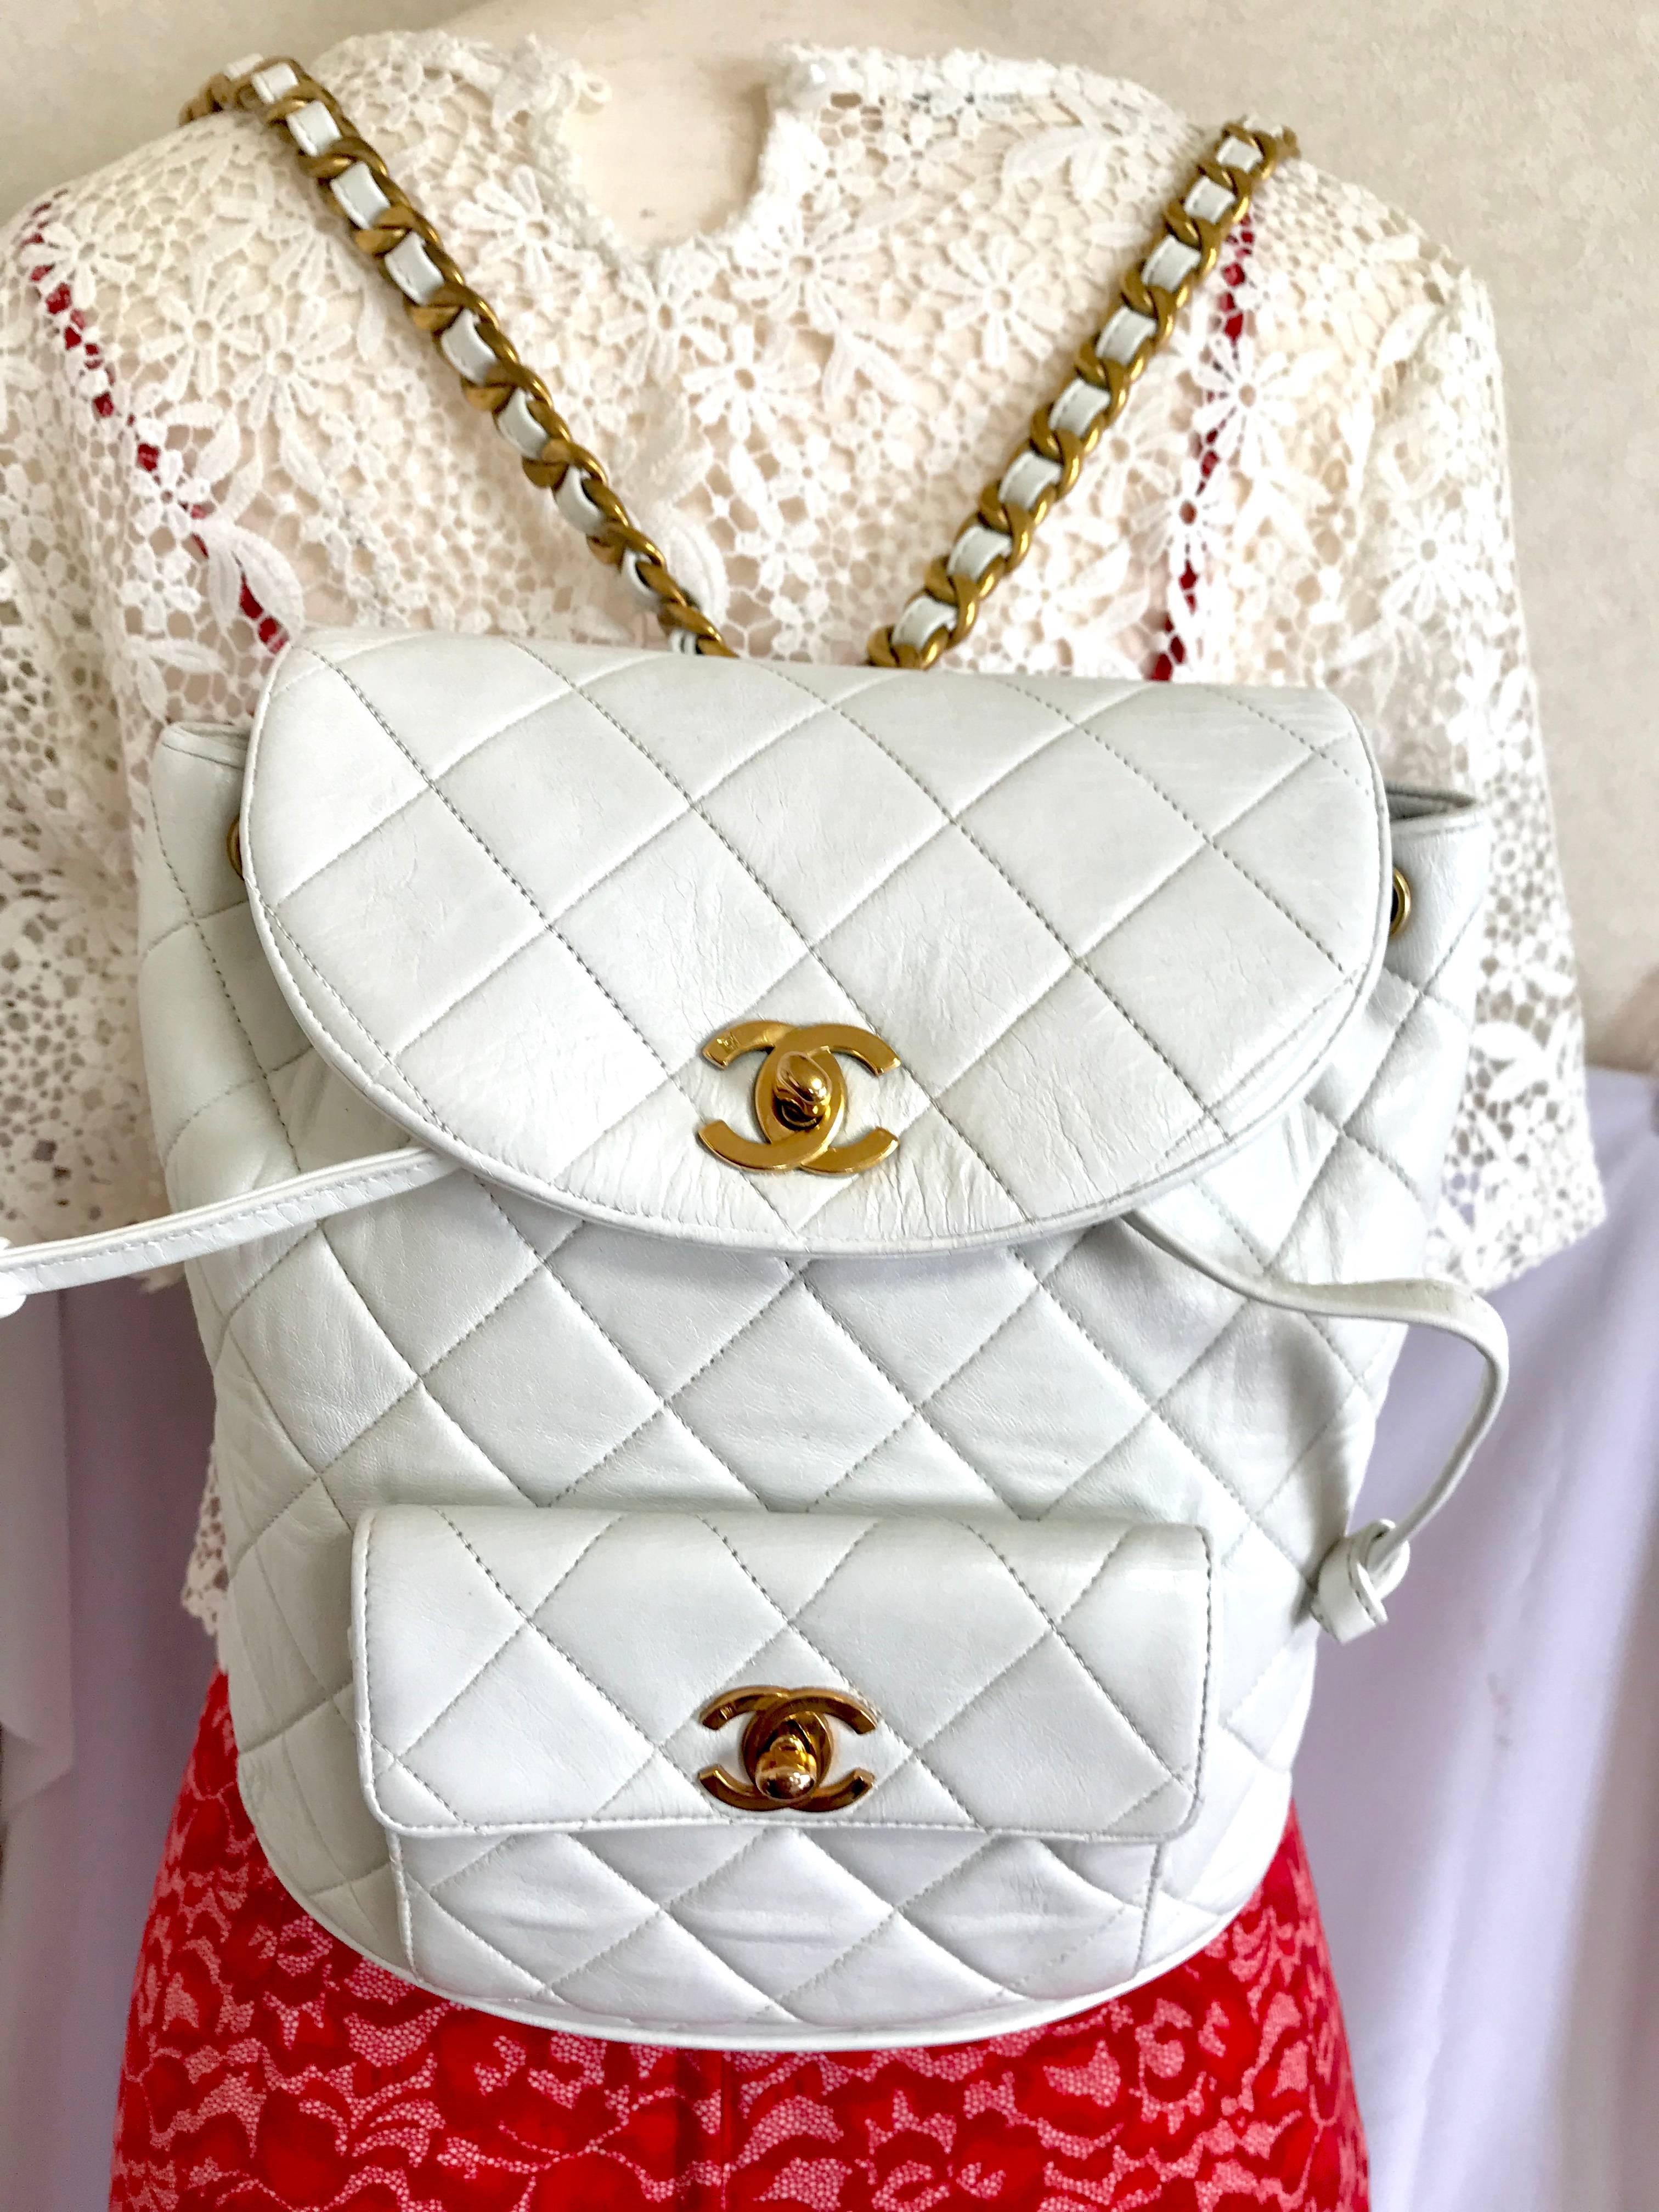 1990s. Vintage CHANEL quilted white lamb leather backpack with golden chain straps and CC closure. Classic and popular bag. Must have.

Here is another one of the most popular vintage lamb leather bag from CHANEL, classic but rare color, white